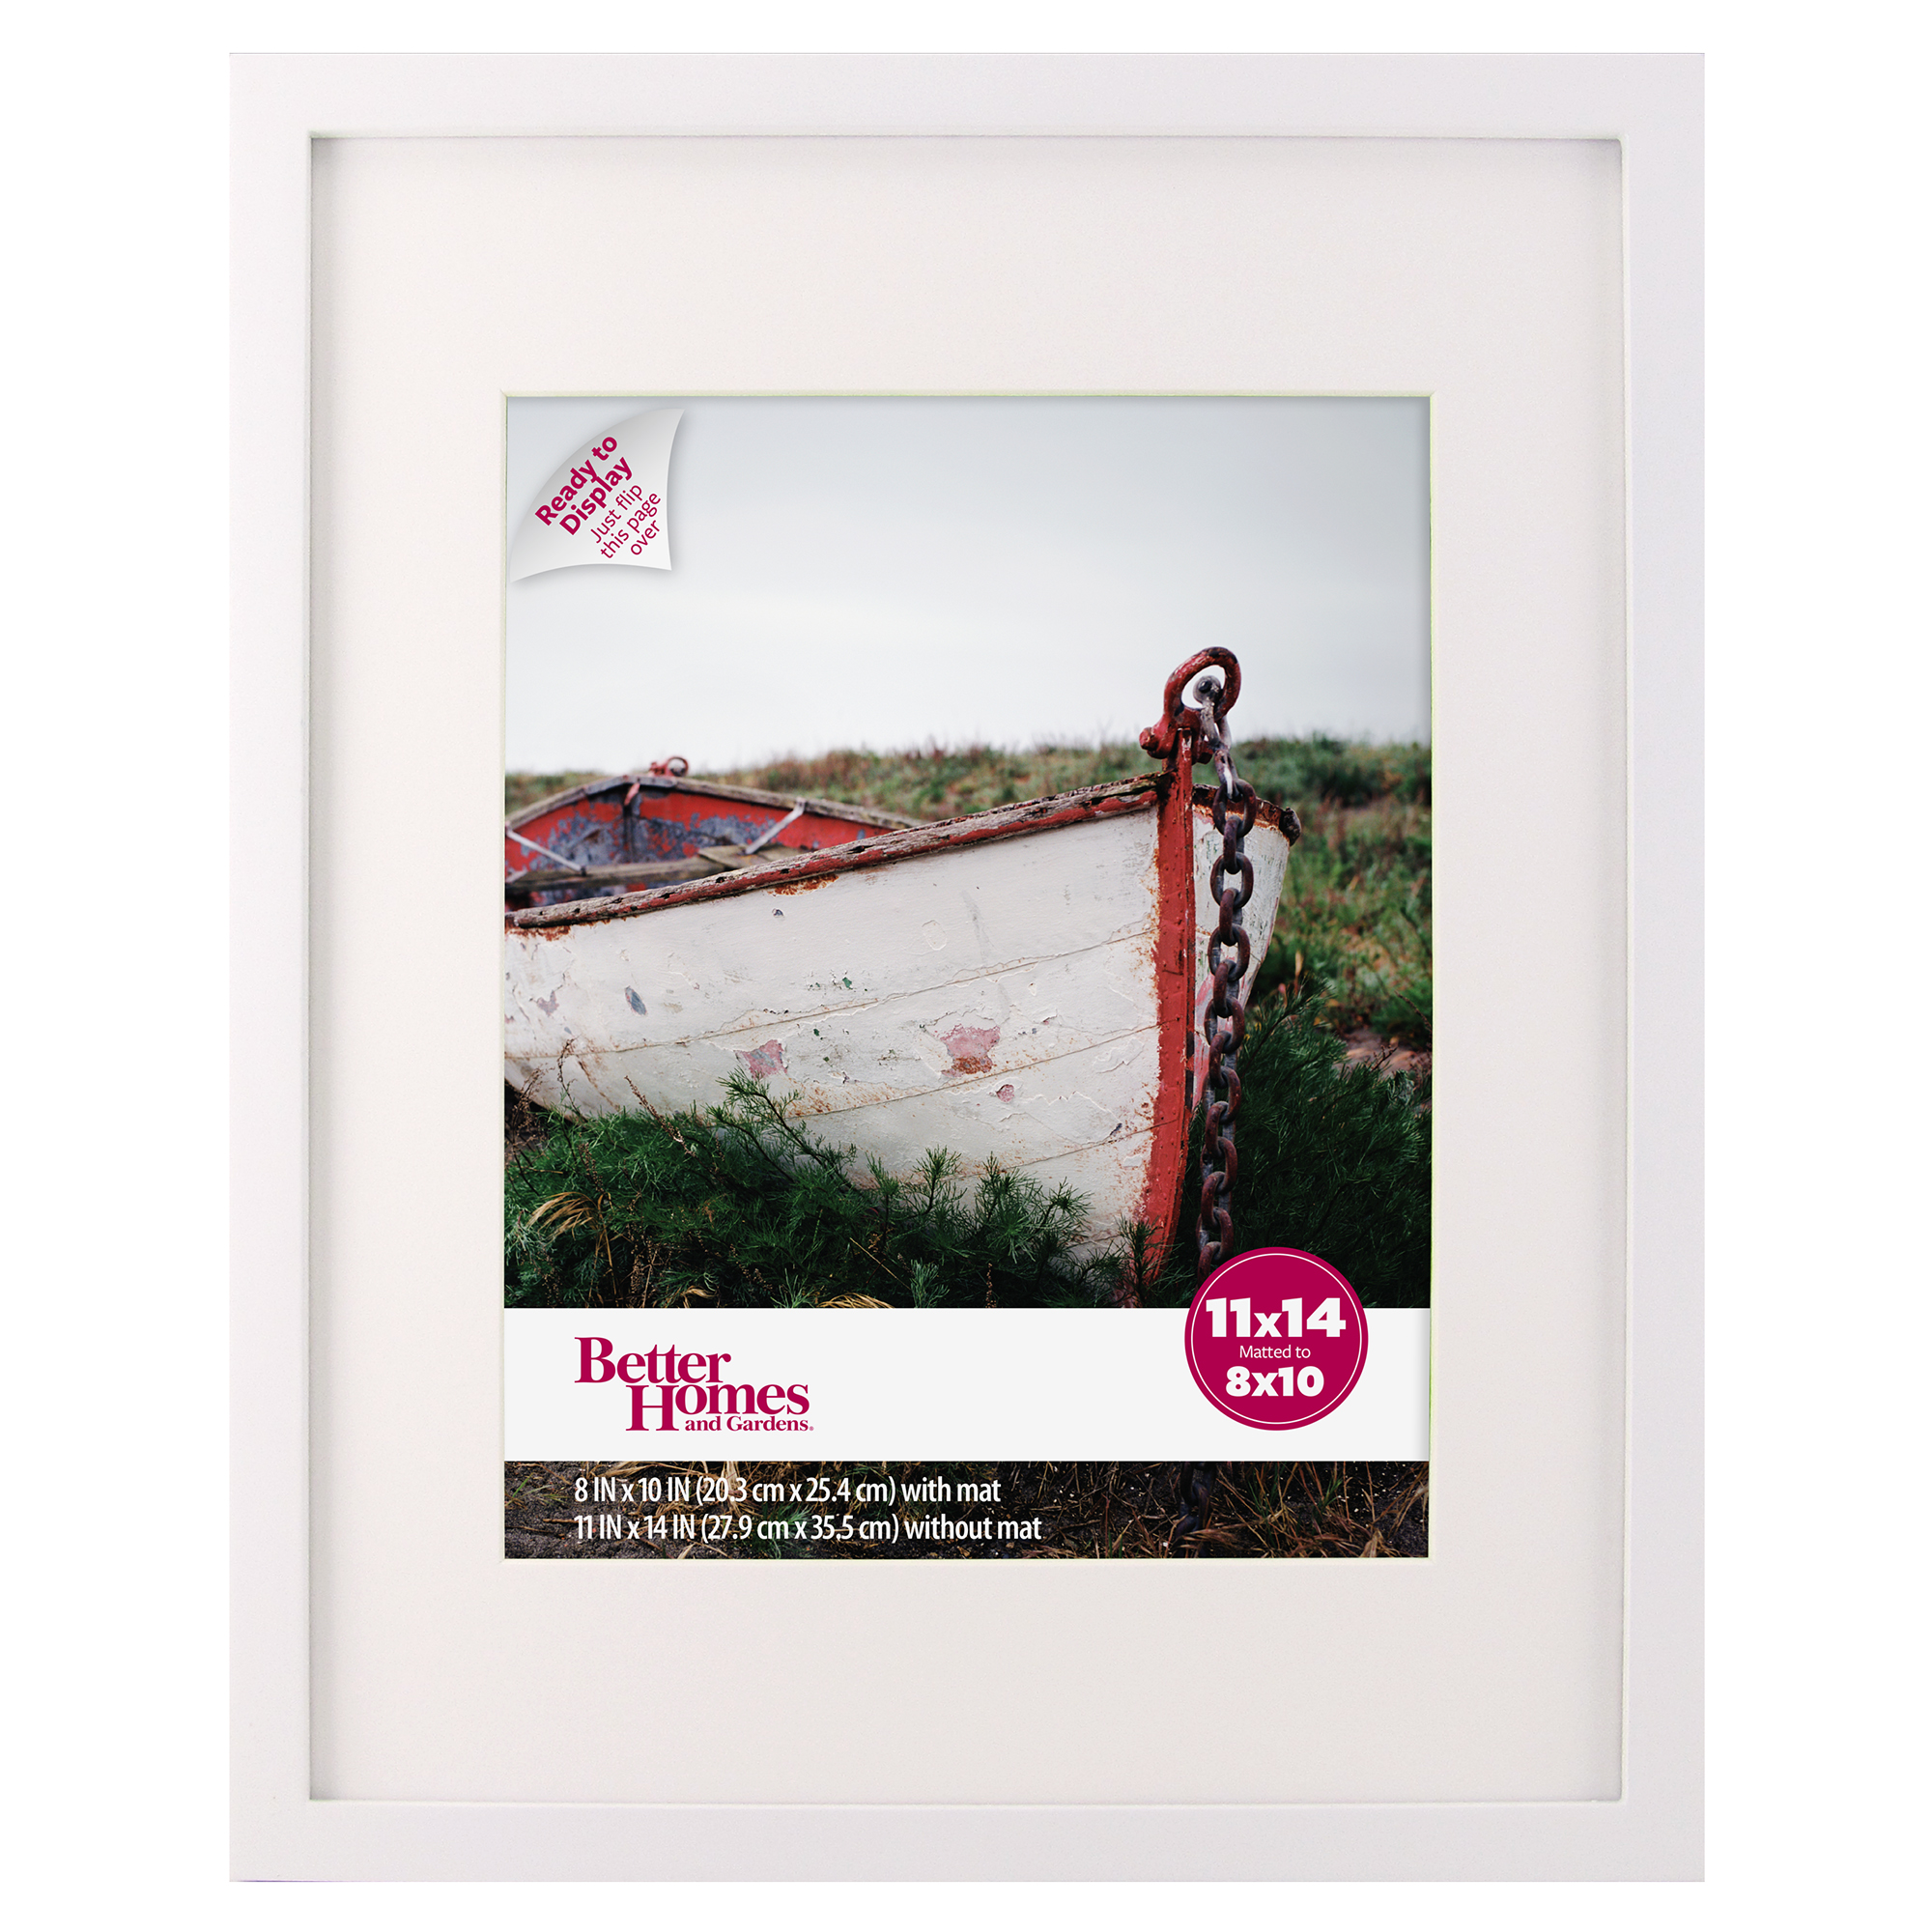 Better Homes & Gardens Gallery 11" x 14" Without Mat for 8" x 10", Wall Picture Frame, White - image 4 of 5